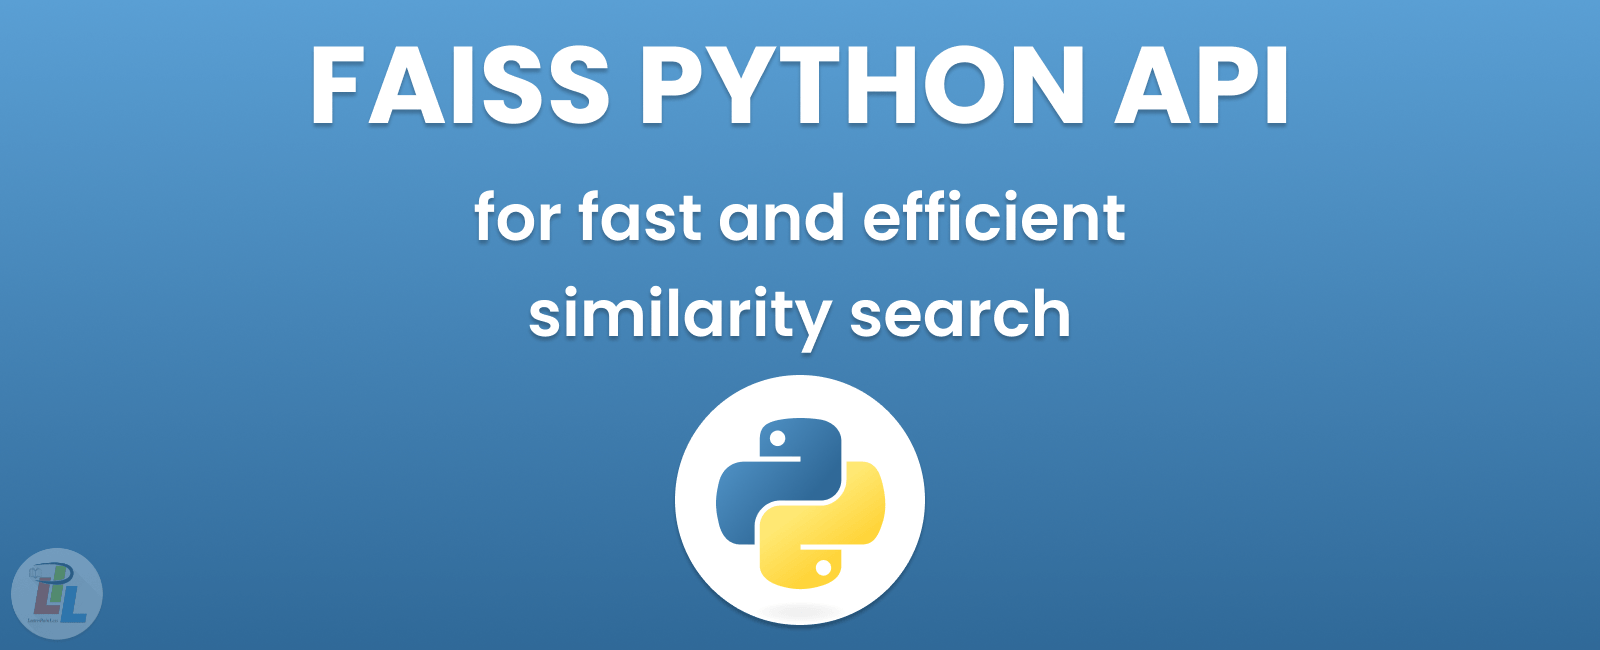 FAISS Python API for fast and efficient similarity search